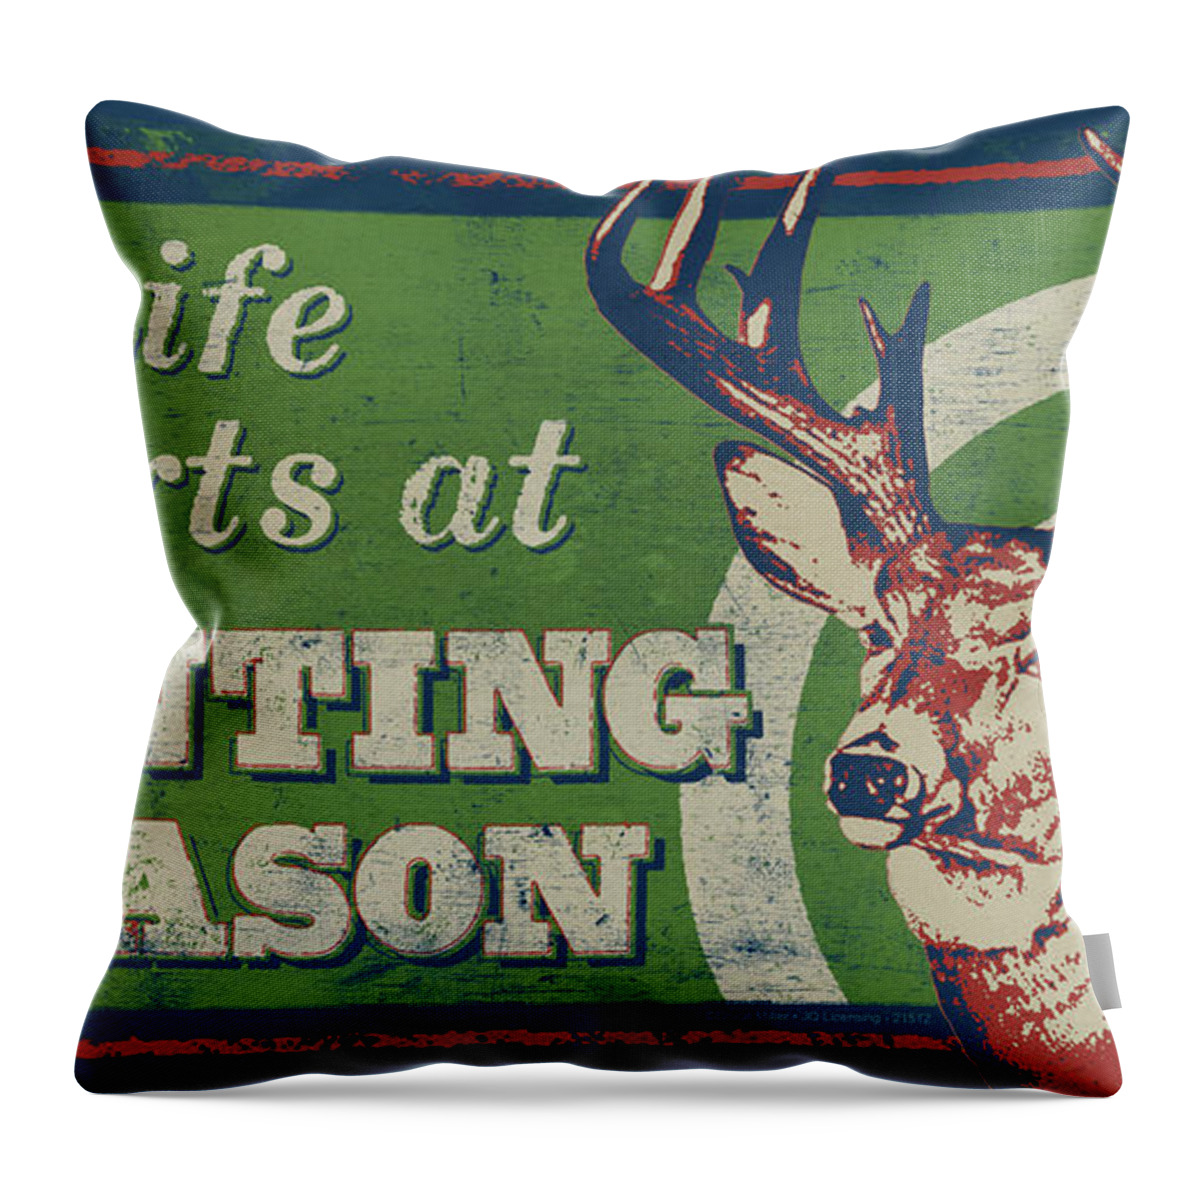 Jq Licensing Throw Pillow featuring the painting Life Starts Hunting Season by Bruce Miller